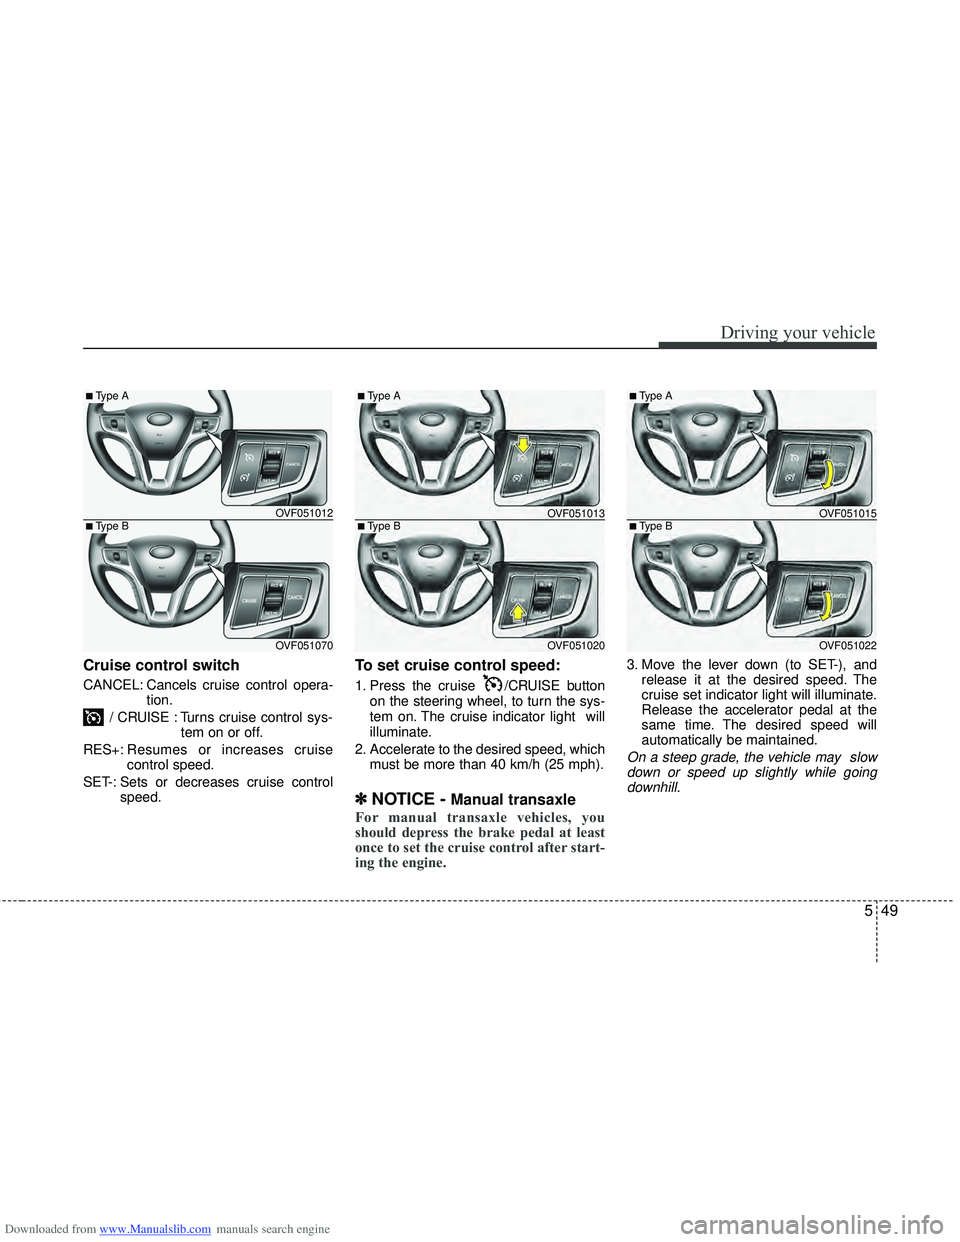 HYUNDAI I40 2018  Owners Manual Downloaded from www.Manualslib.com manuals search engine 549
Driving your vehicle
Cruise control switch
CANCEL: Cancels cruise control opera-tion.
/ CRUISE : Turns cruise control sys- tem on or off.
R